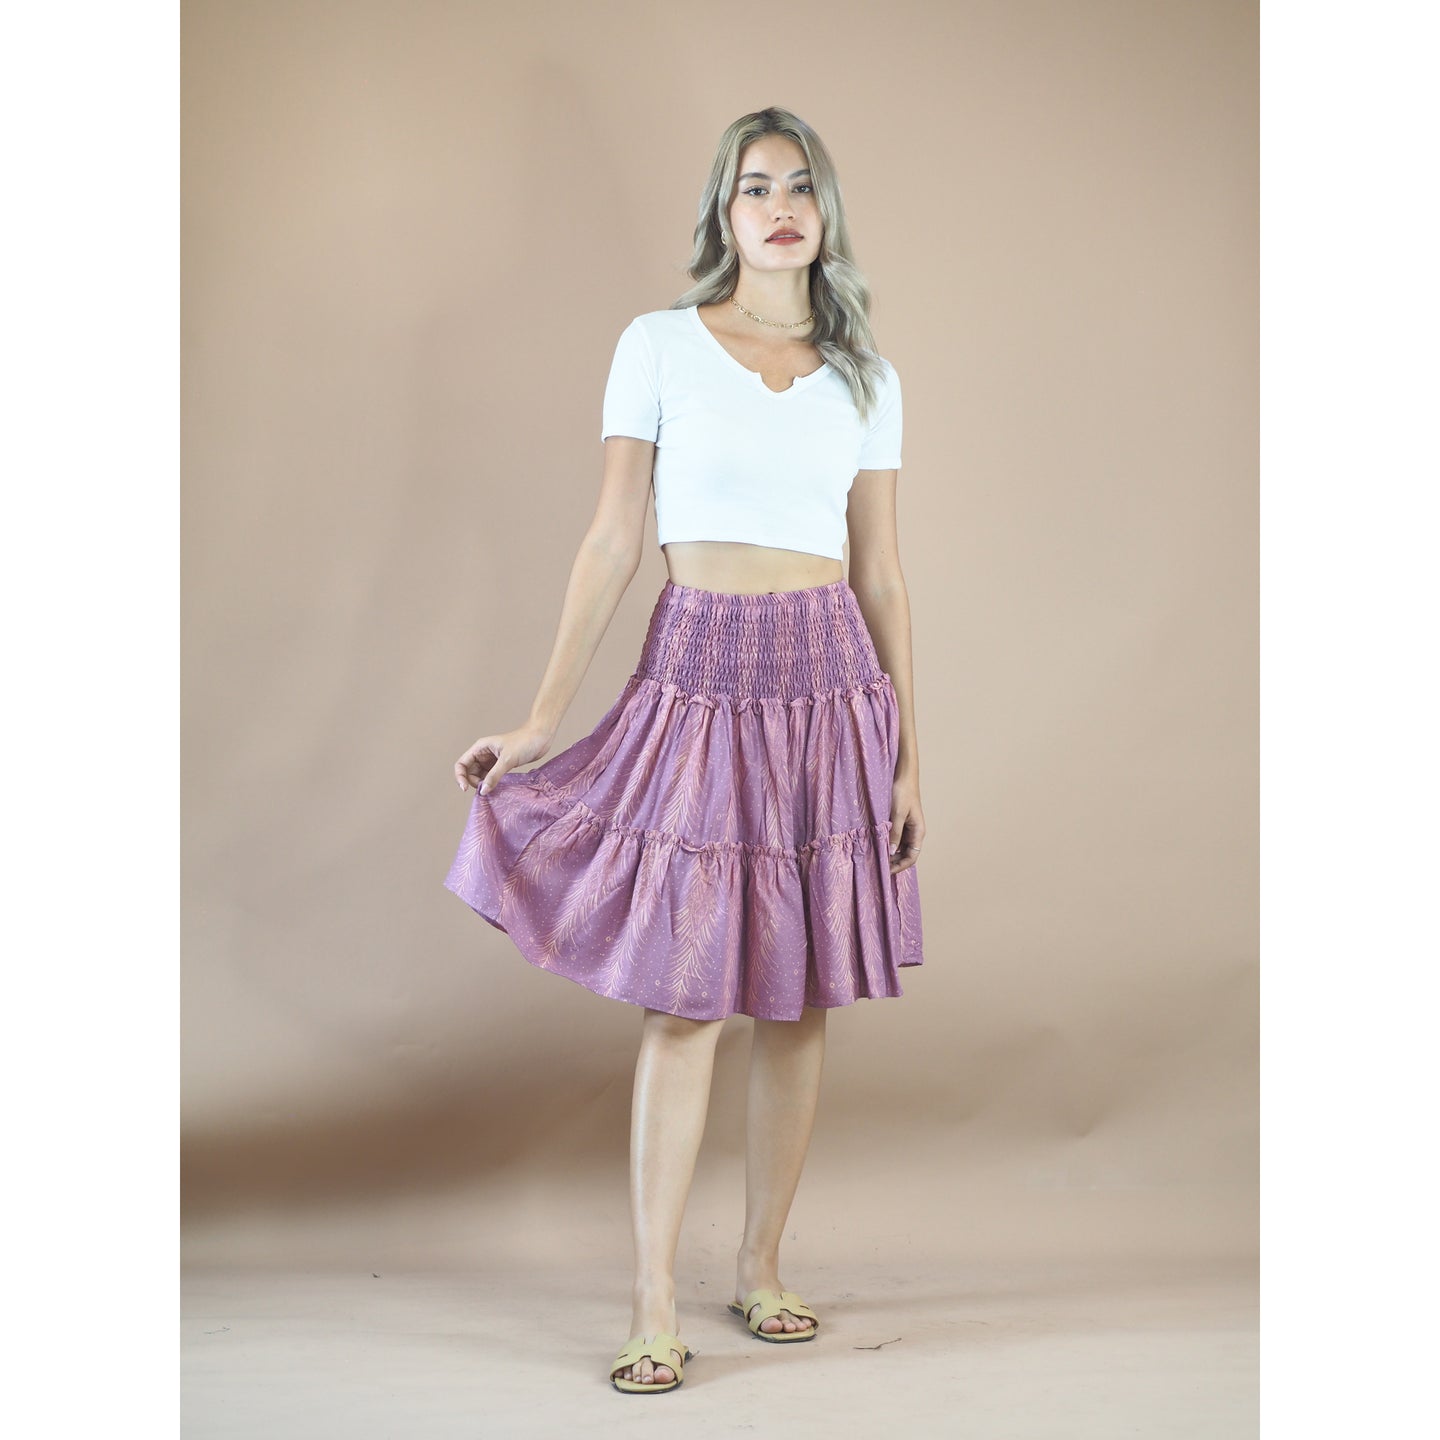 Peacock Feather Women's Skirt in Pink SK0090 020015 05